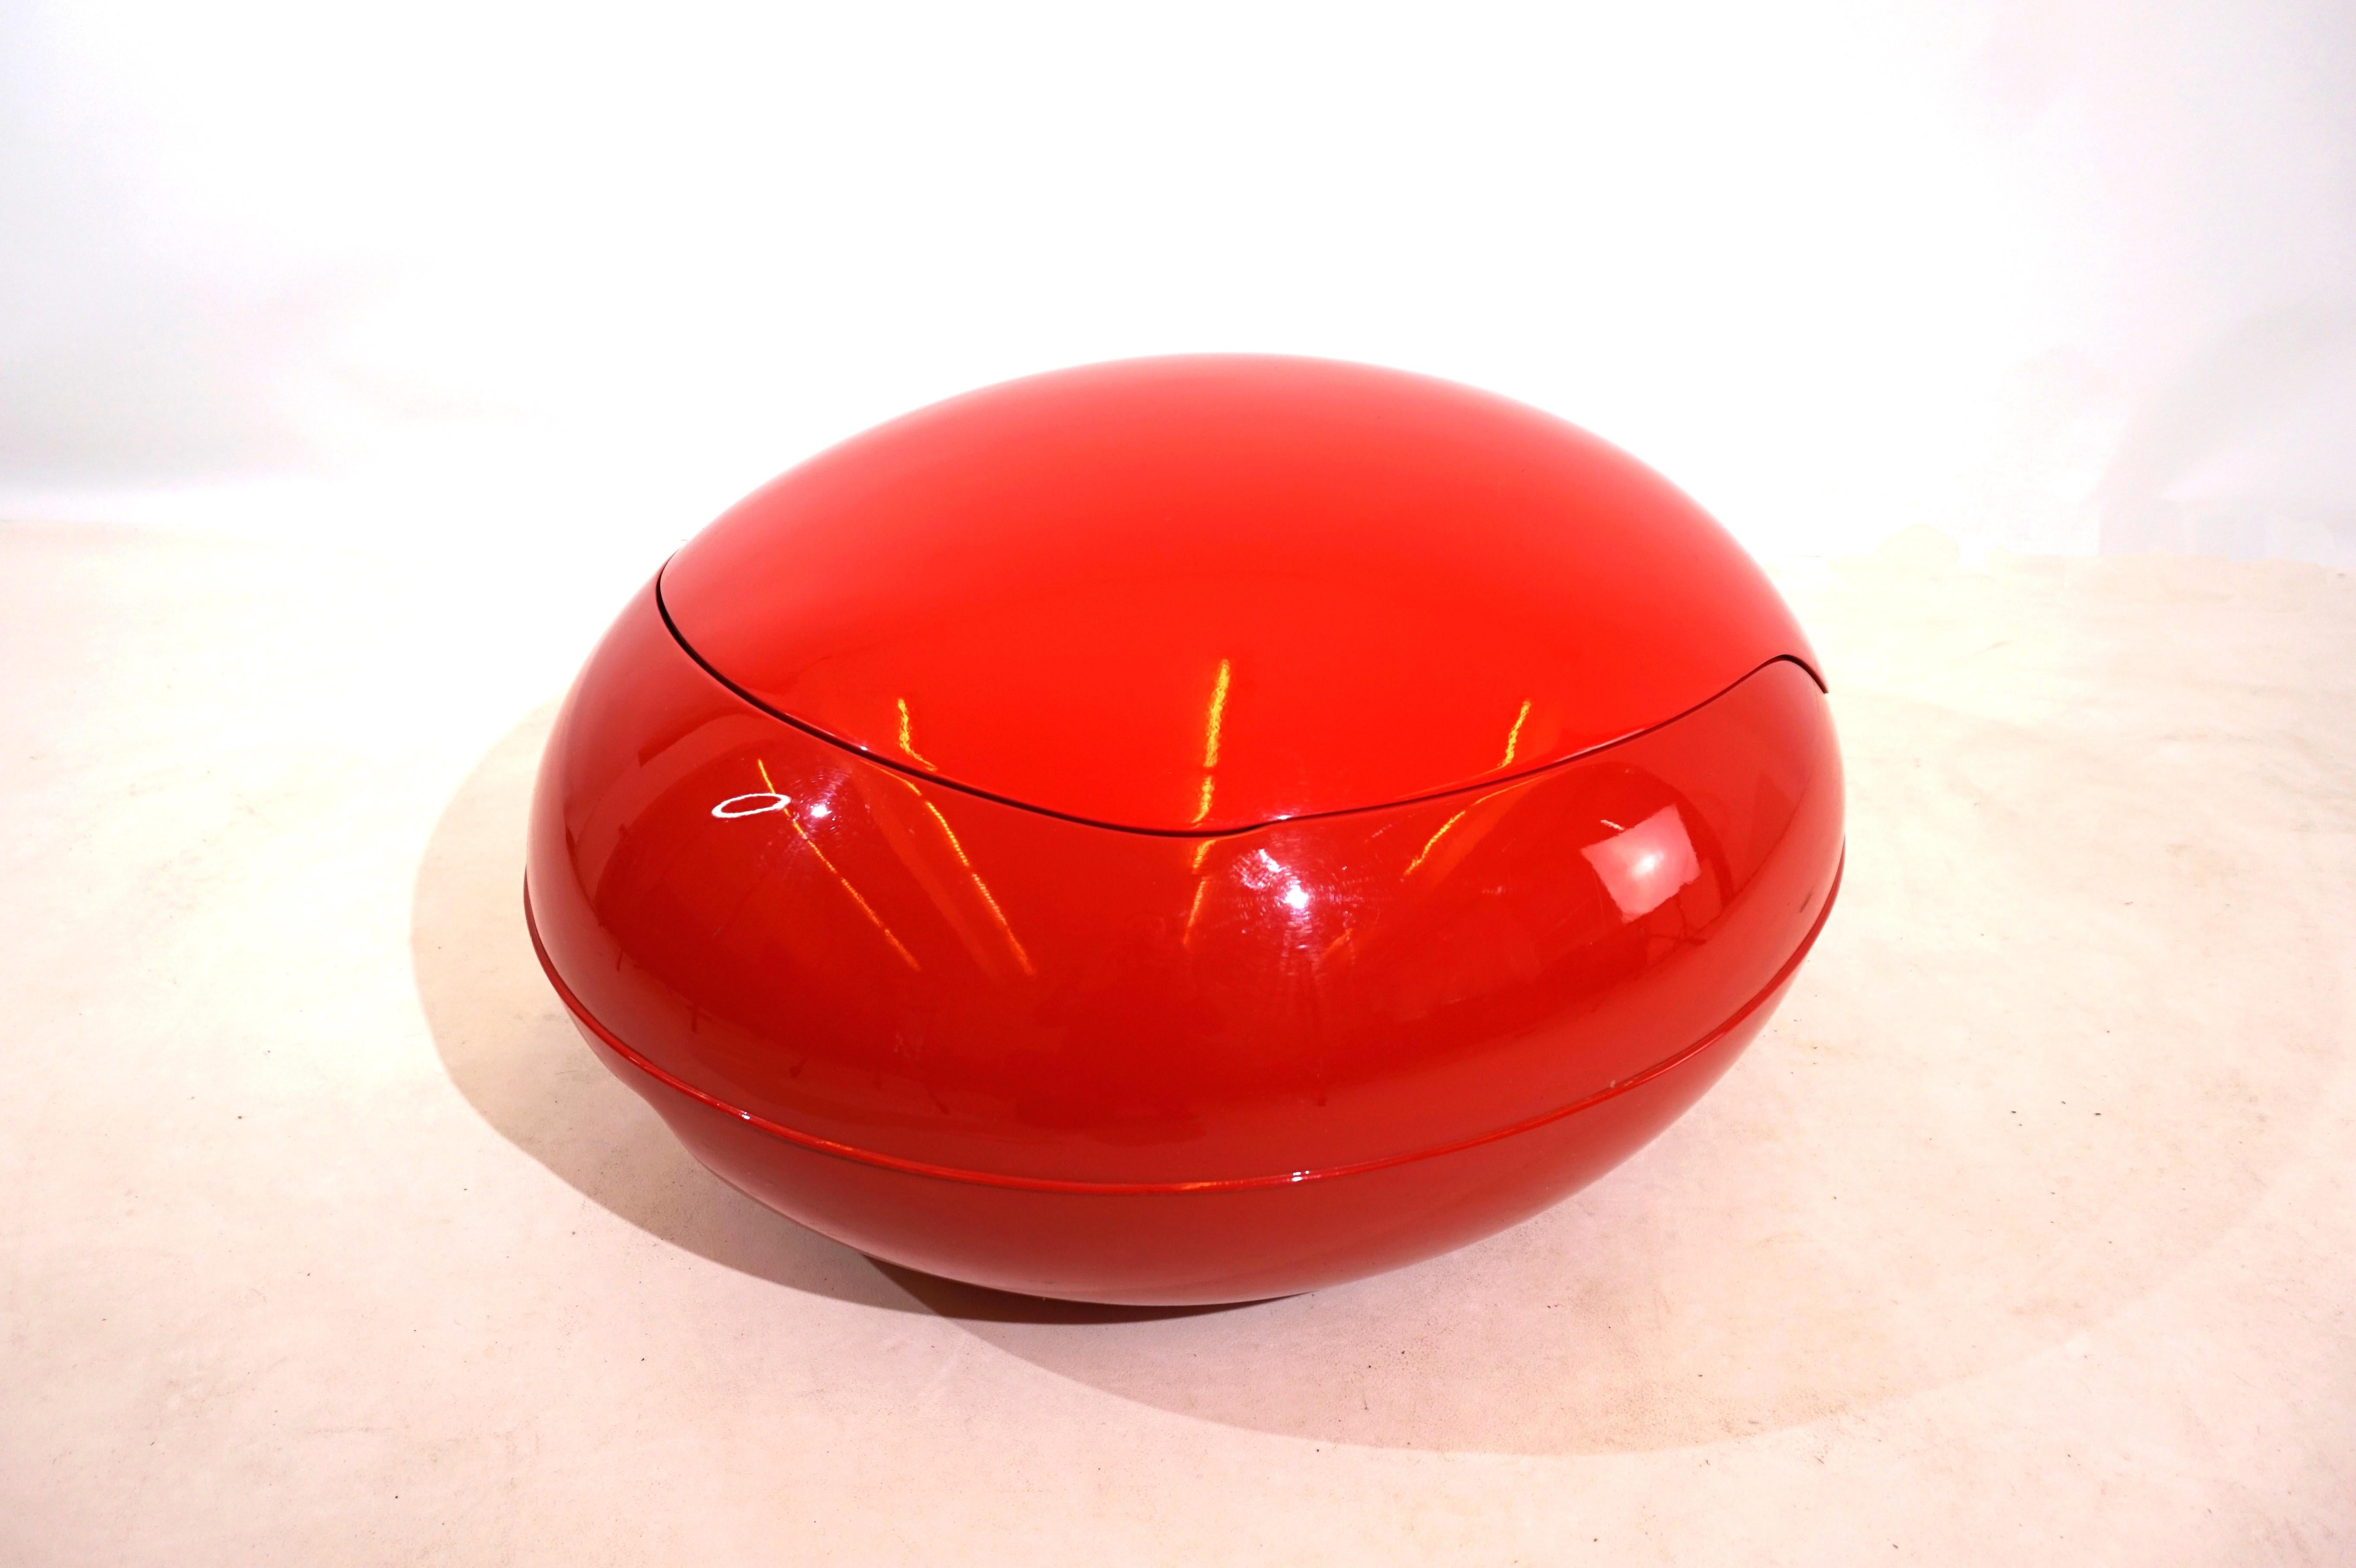 Plastic Garden Egg armchair by Peter Ghyczy for Reuter